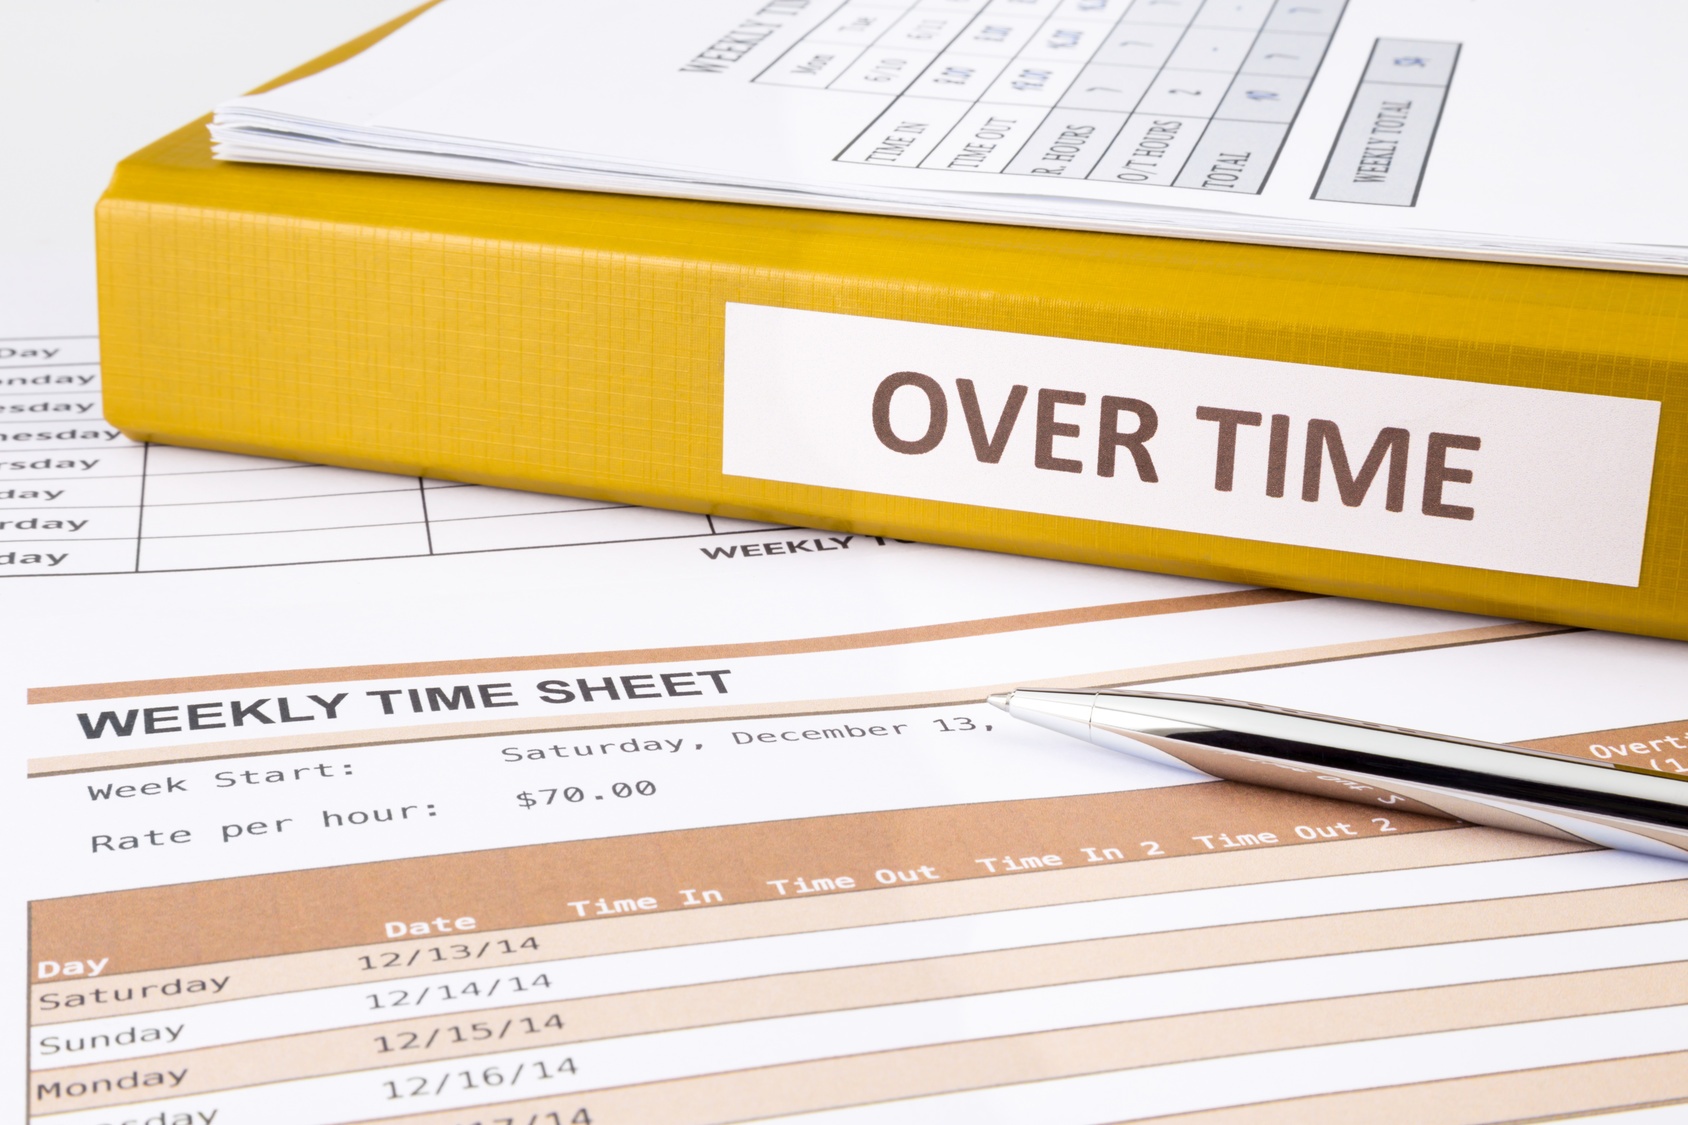 Overtime Pay